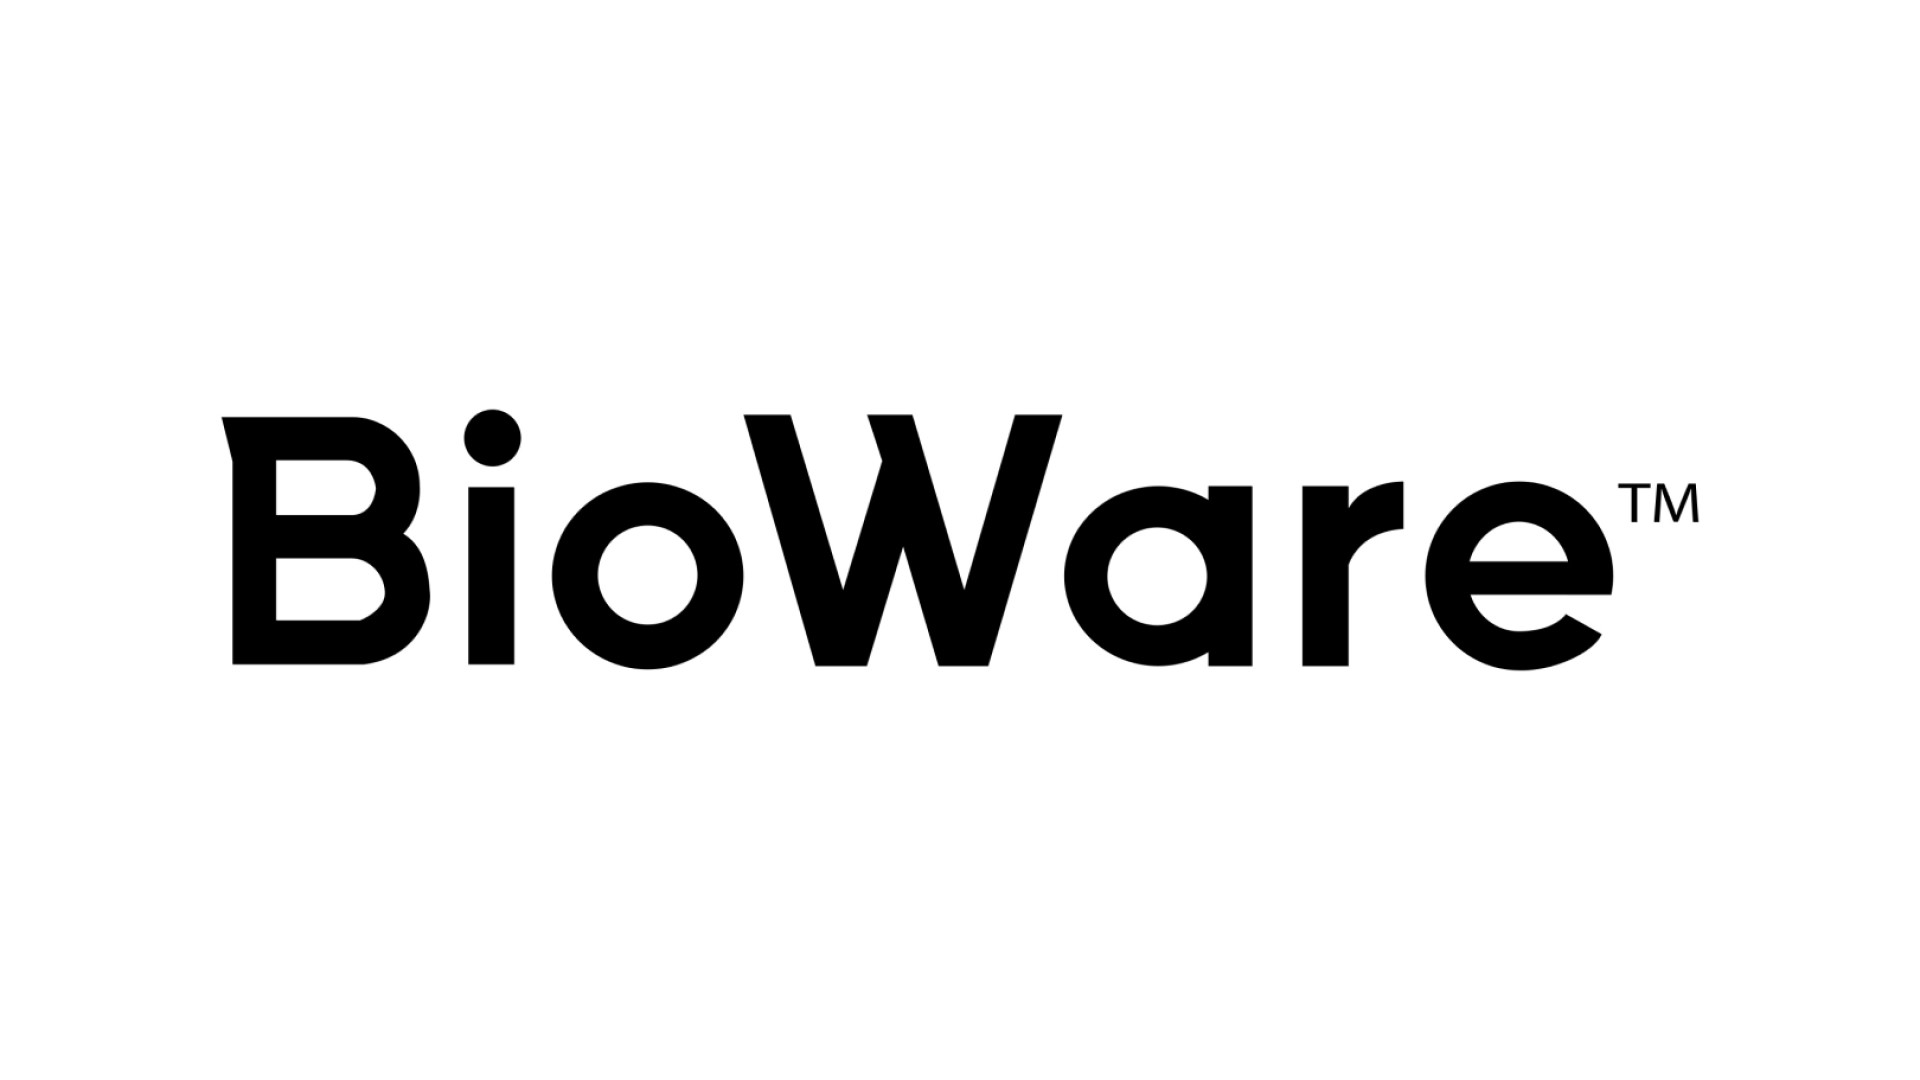 BioWare Employees Write Reviews; Gets Caught